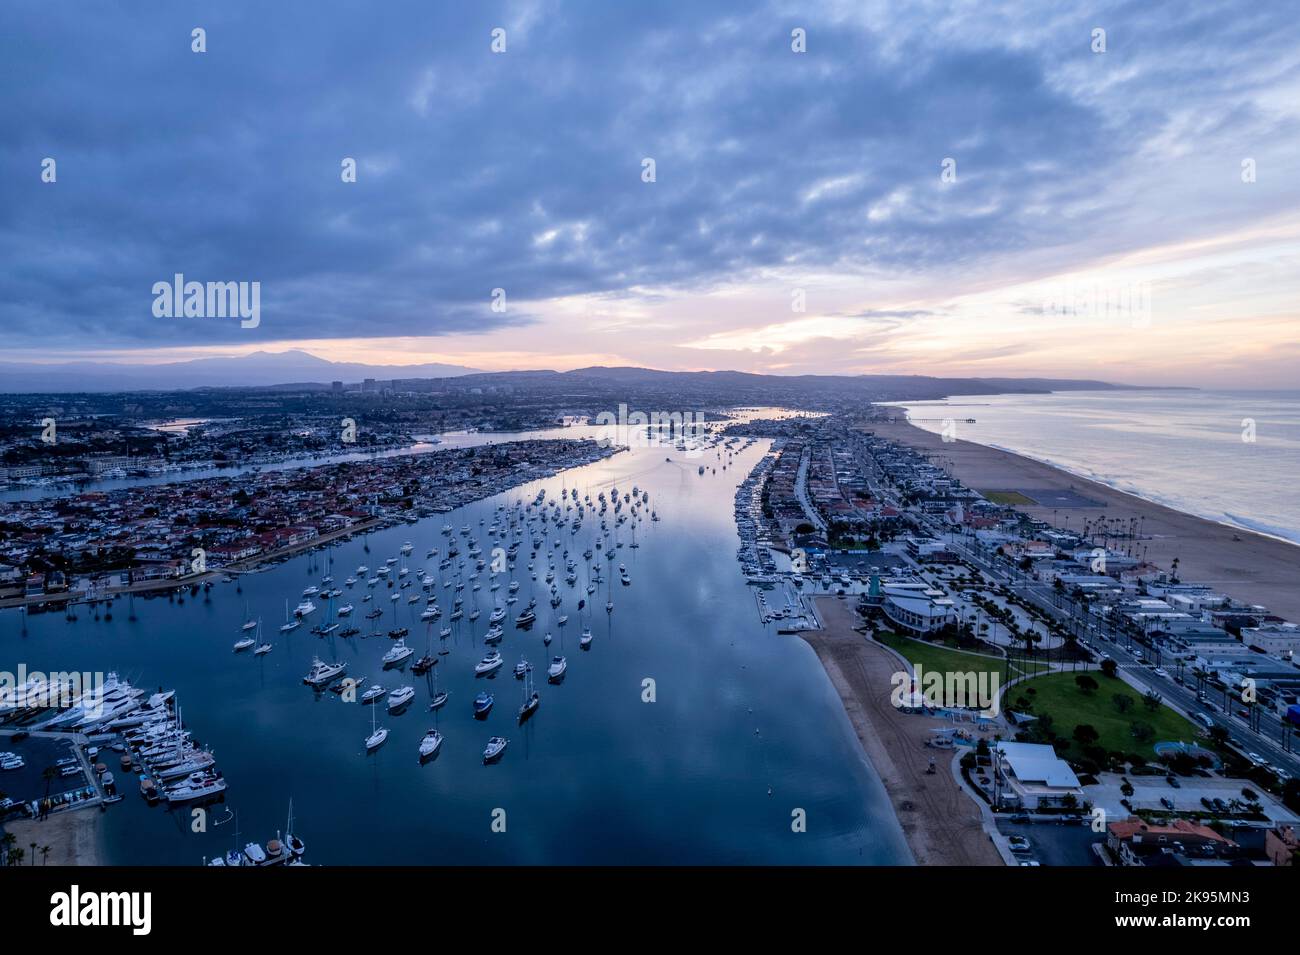 A landscape view of Newport Beach, Orange County with hundreds boats and ships, California Stock Photo